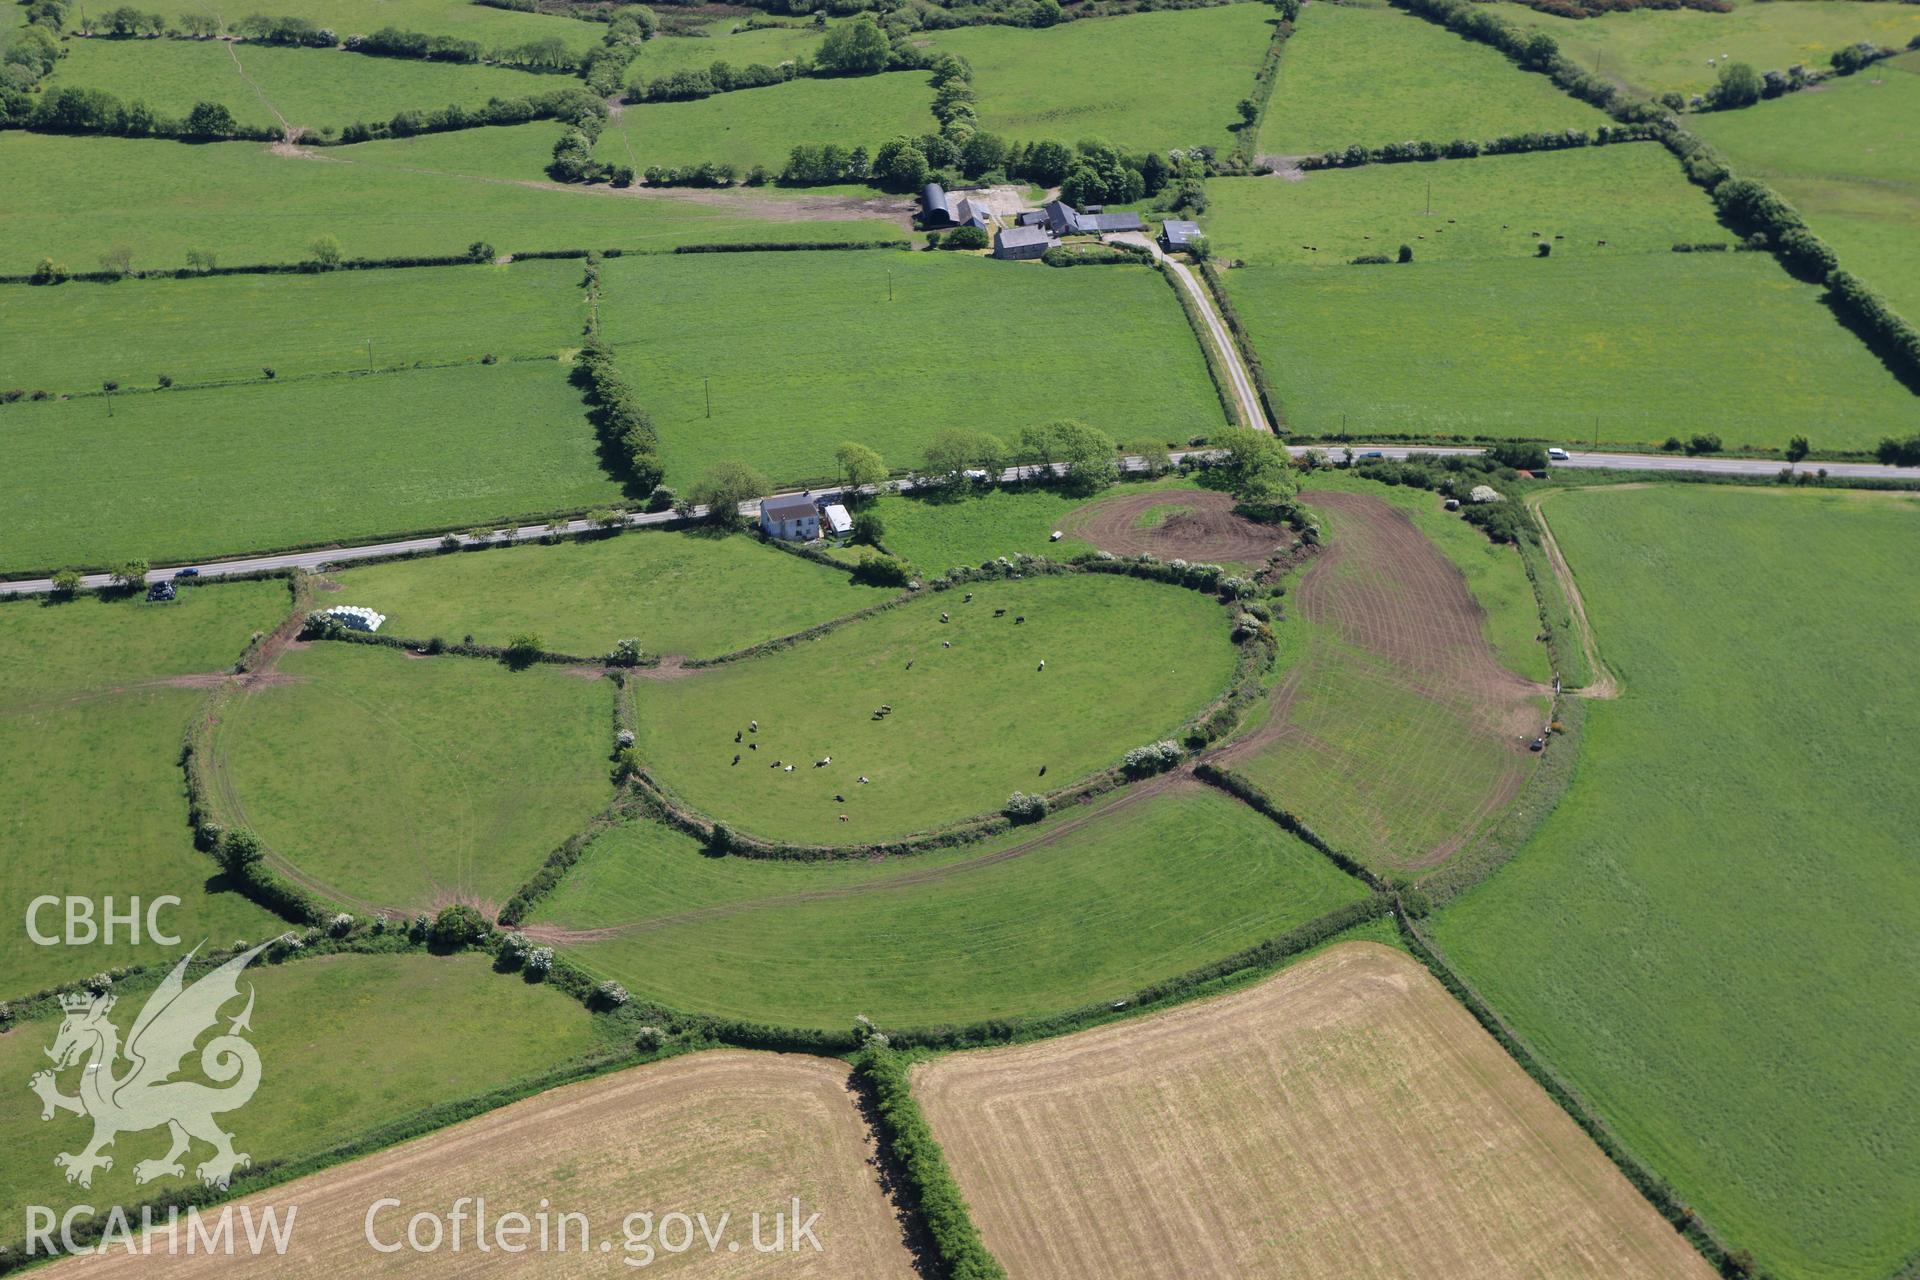 RCAHMW colour oblique aerial photograph of Castell Nadolig. Taken on 01 June 2009 by Toby Driver